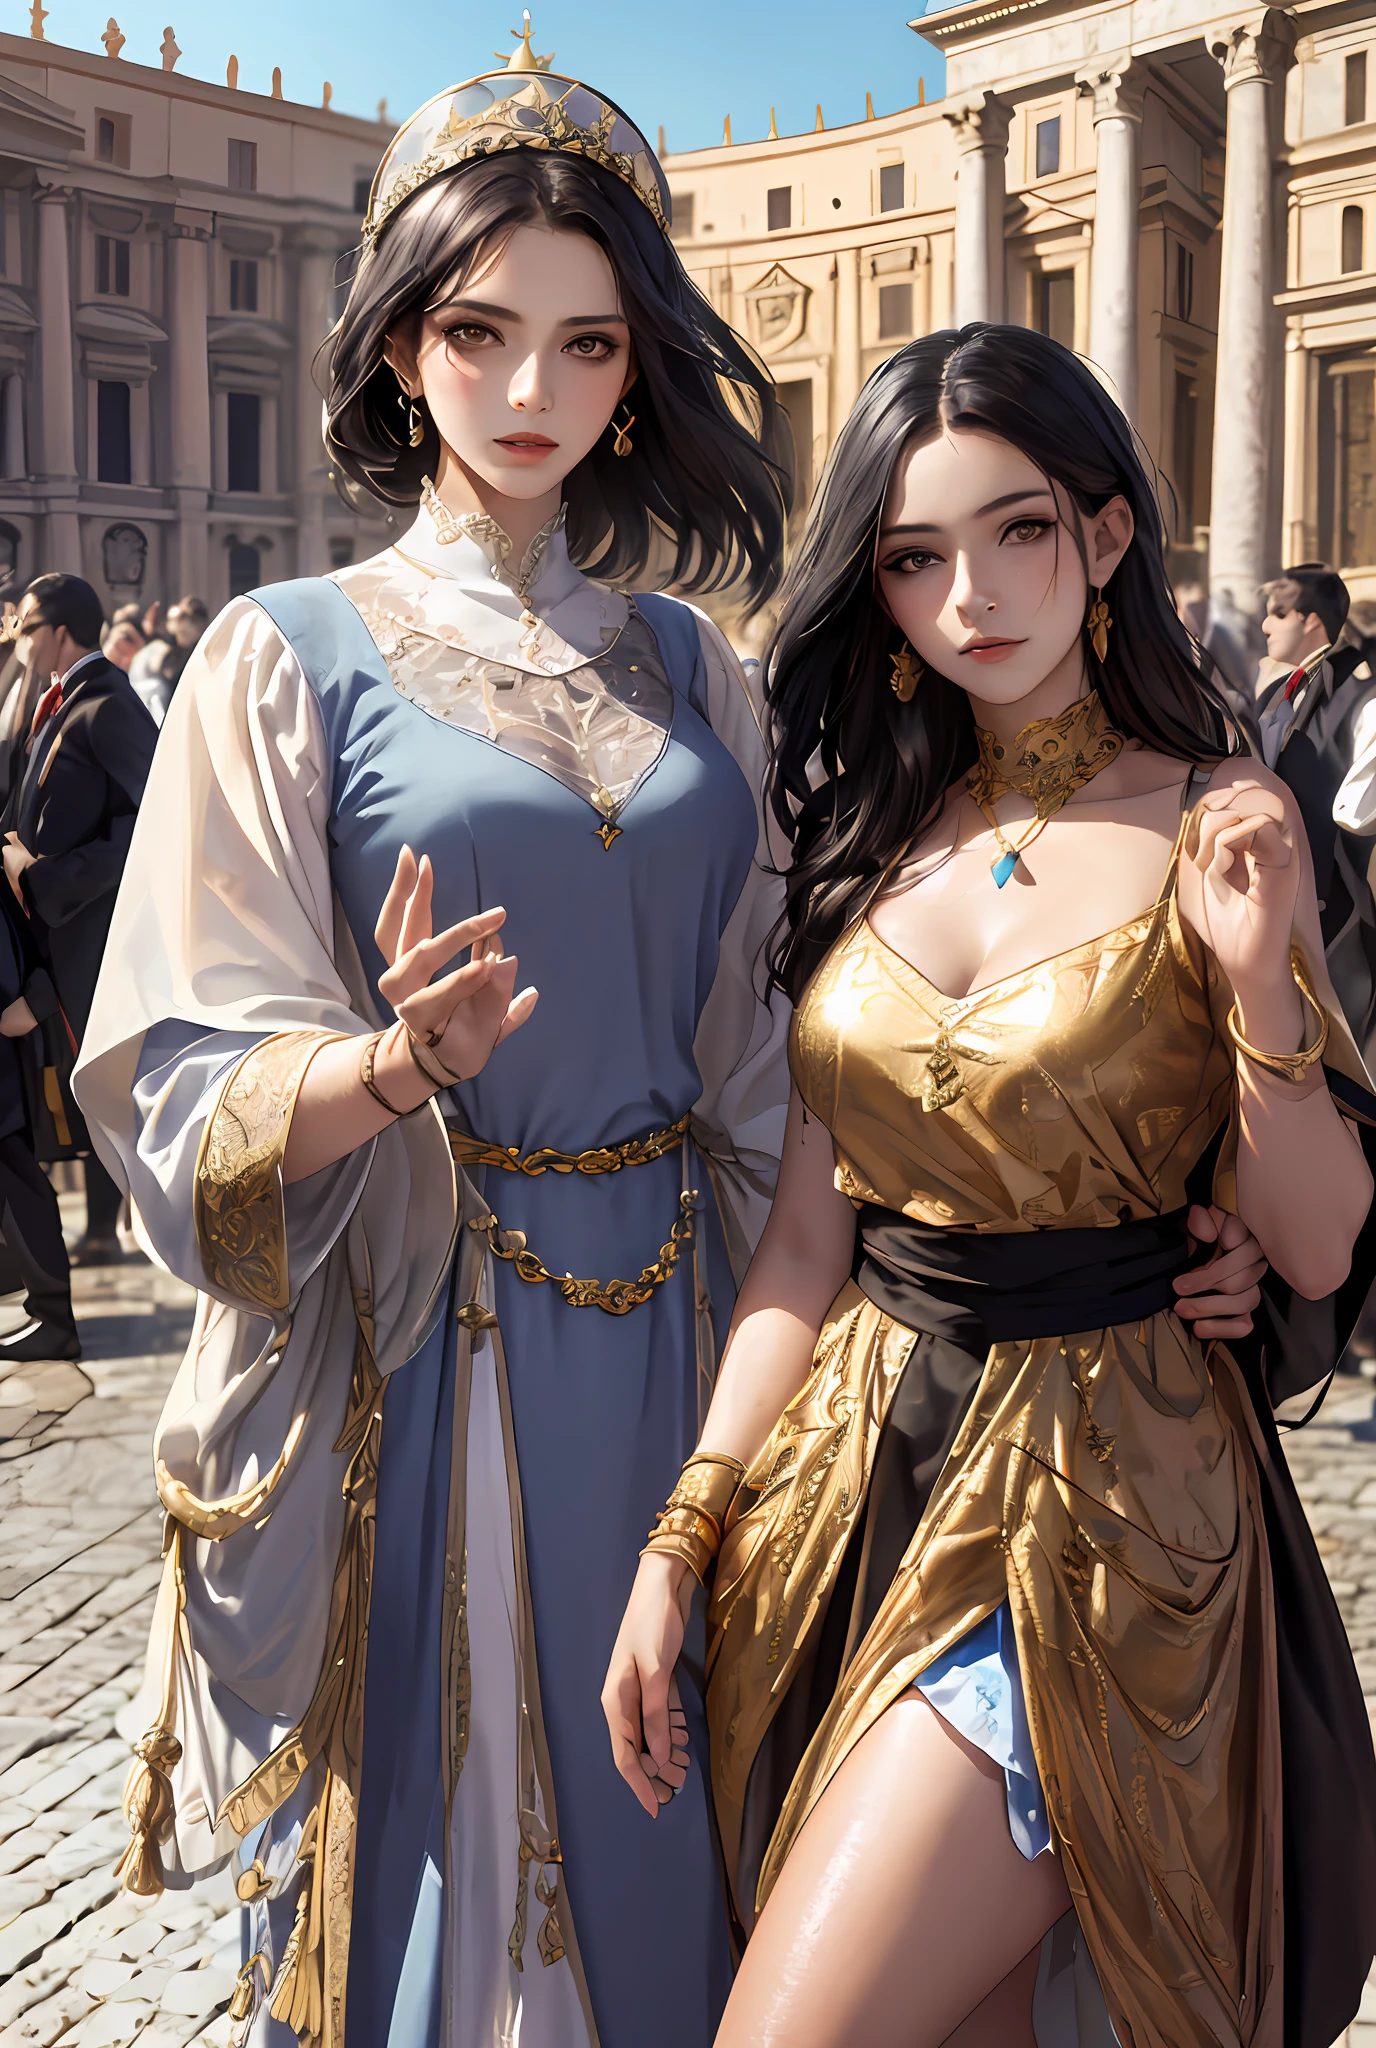 (Masterpiece, Best quality, Realistic),
2girls,duo,(on the St. Peter's Square of Vatican,crowd of), Saint. Peter's Square of Vatican background,gypsy dress,(Princess Eyes,shiny pupils),Dancing,  Gold, banquet, crowd of, picking up skirt,
[Slight smile],